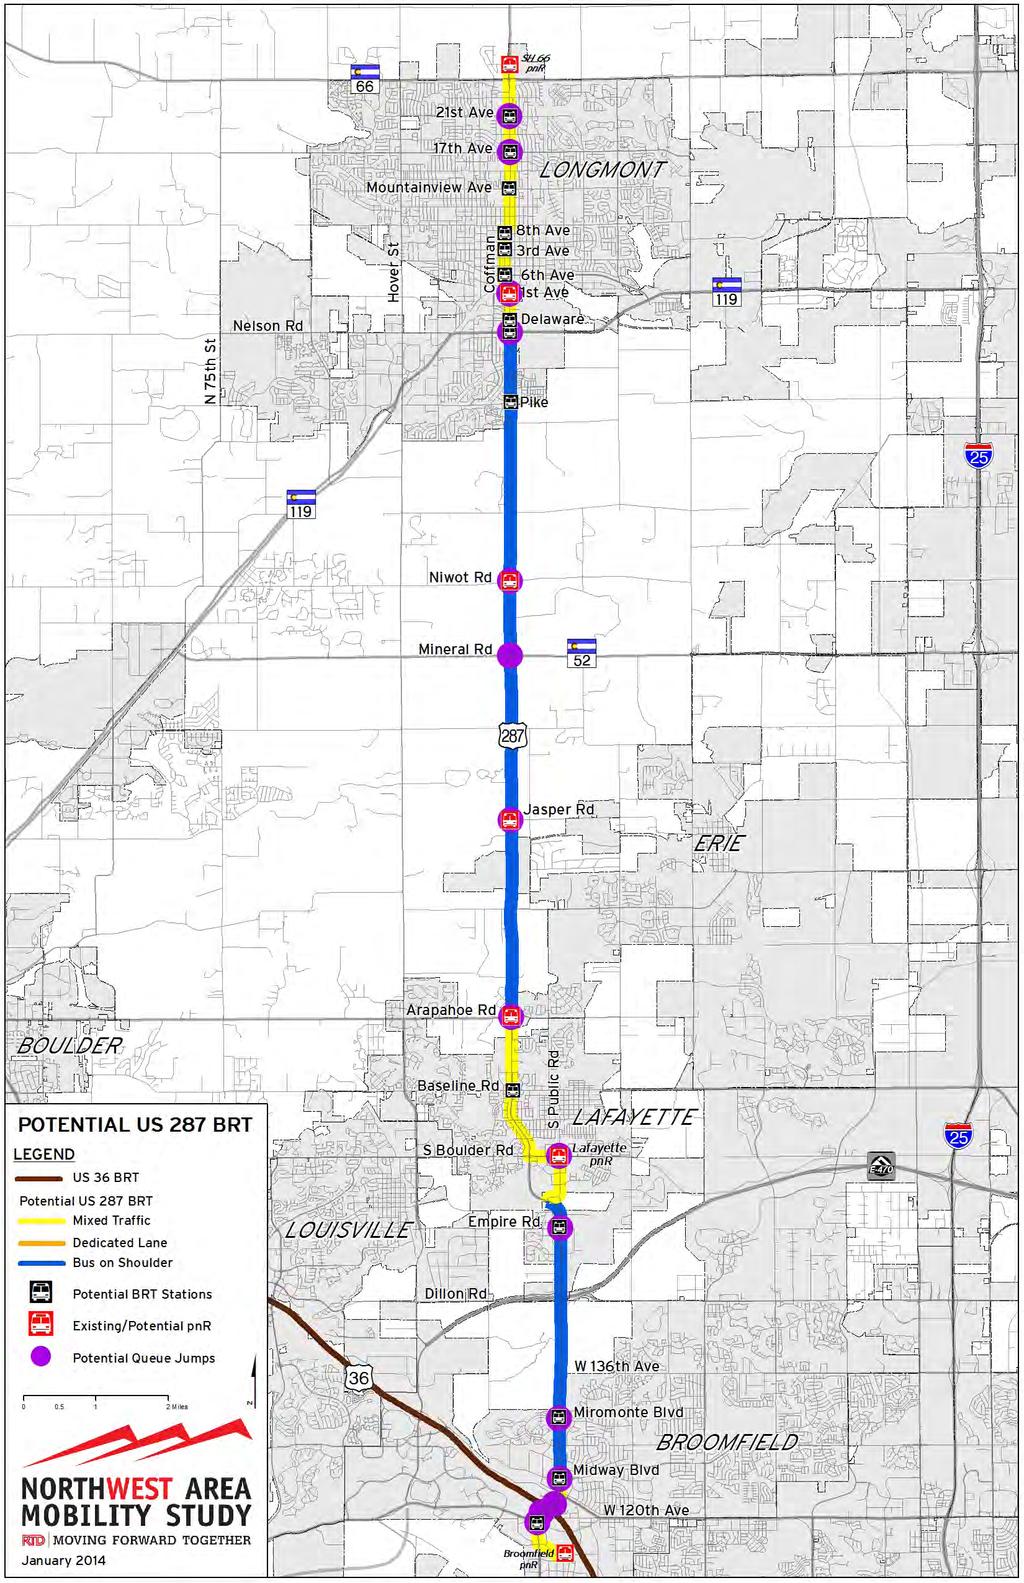 US 287 BRT AT A GLANCE Starts/Ends: US-287 / 21st Ave Park-n-Ride in Longmont to US 36 / Broomfield Park-n-Ride Length: 21.